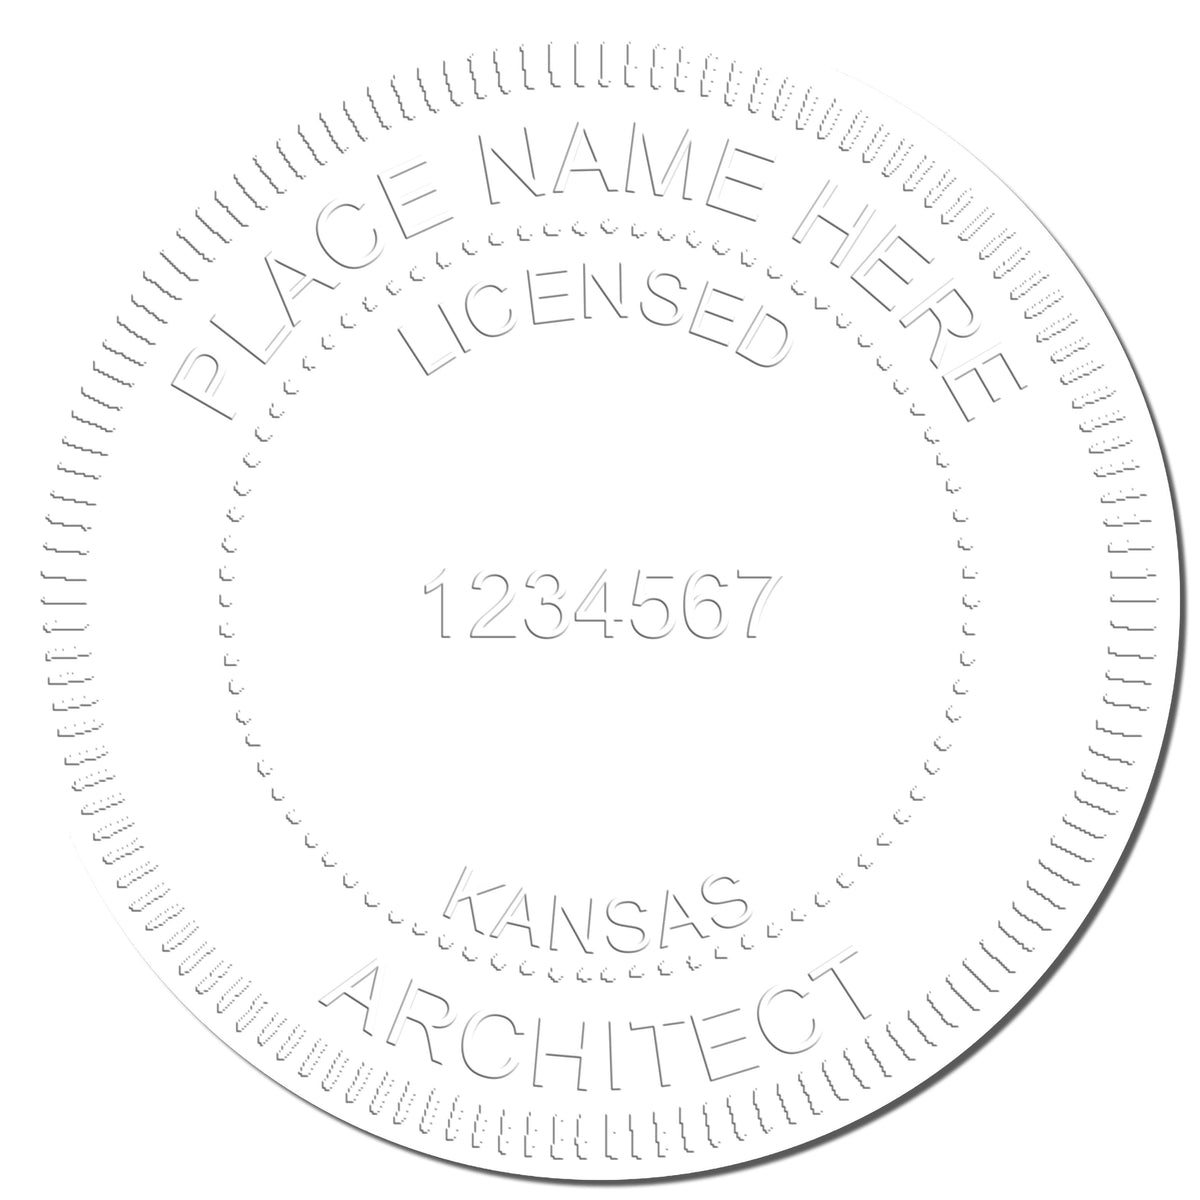 A photograph of the Kansas Desk Architect Embossing Seal stamp impression reveals a vivid, professional image of the on paper.